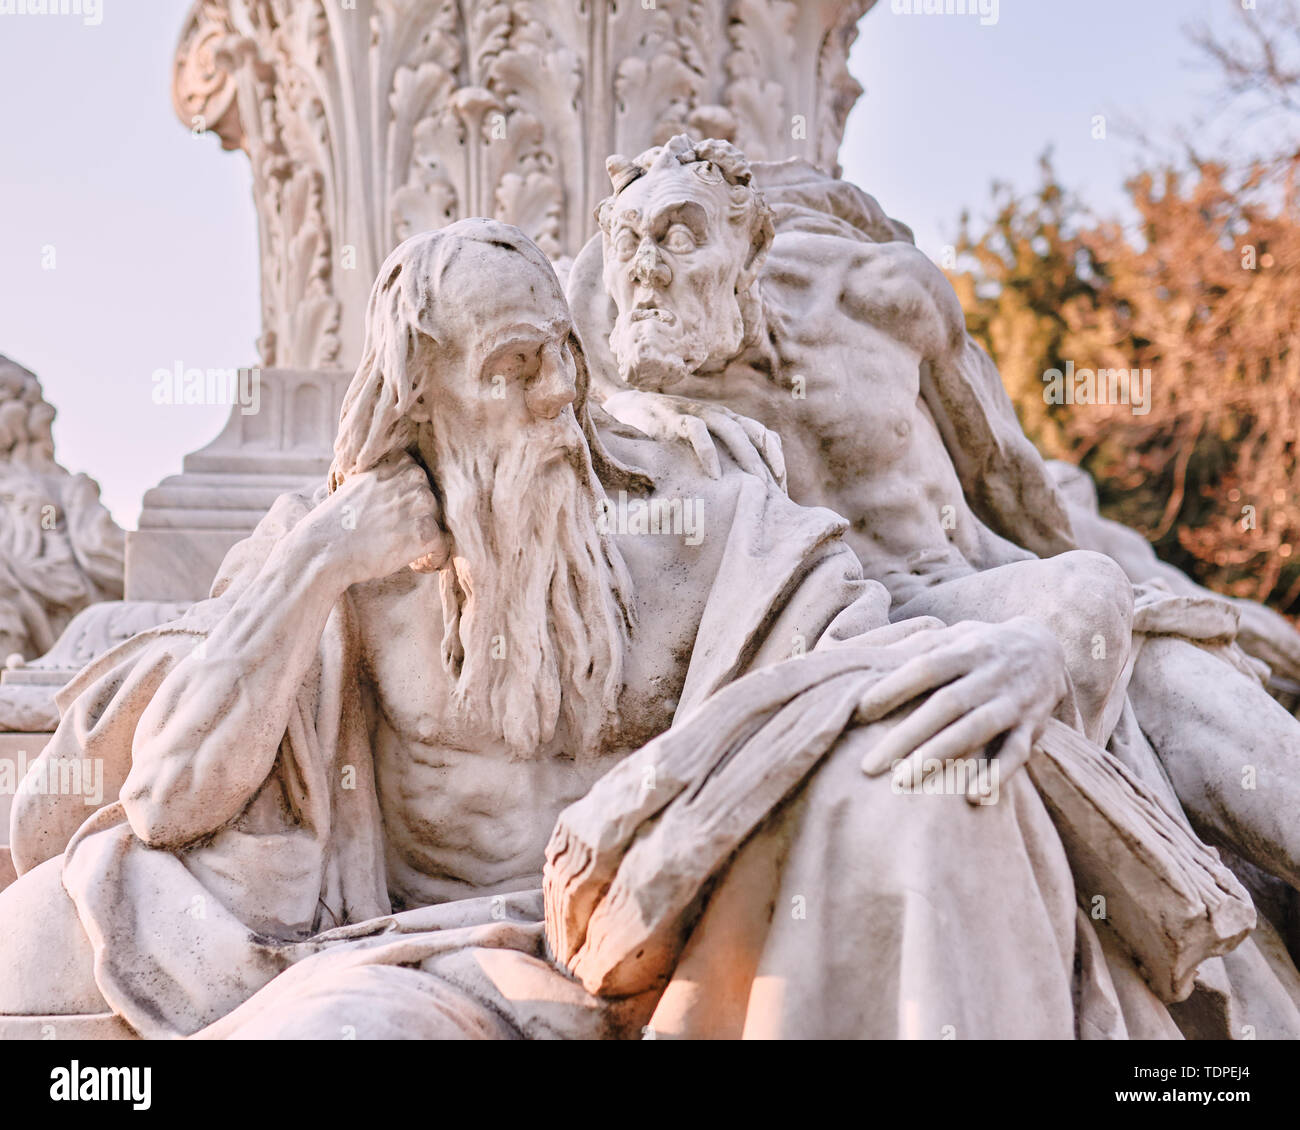 Rome, detail of monument to Johann Wolfgang von Goethe in Villa Borghese park Stock Photo